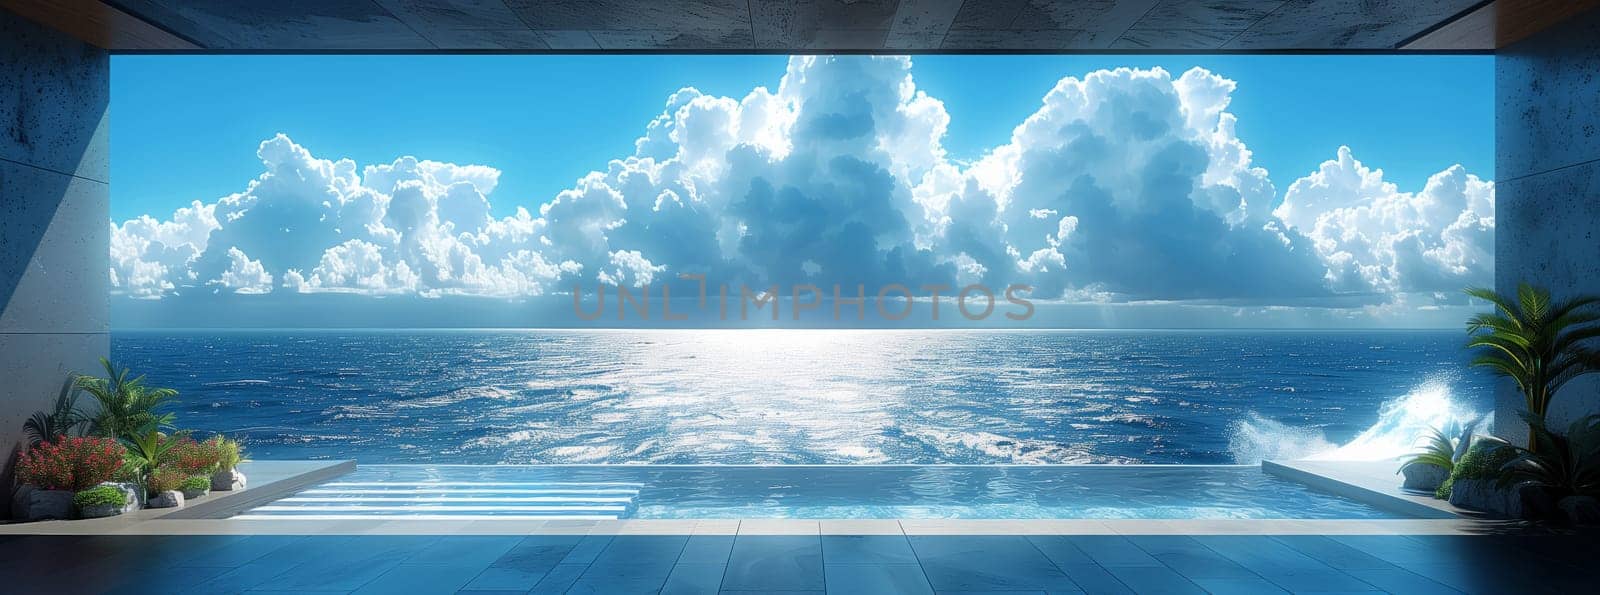 A room with a view of the ocean showcasing the horizon where water meets the sky, with fluffy cumulus clouds enhancing the natural landscape